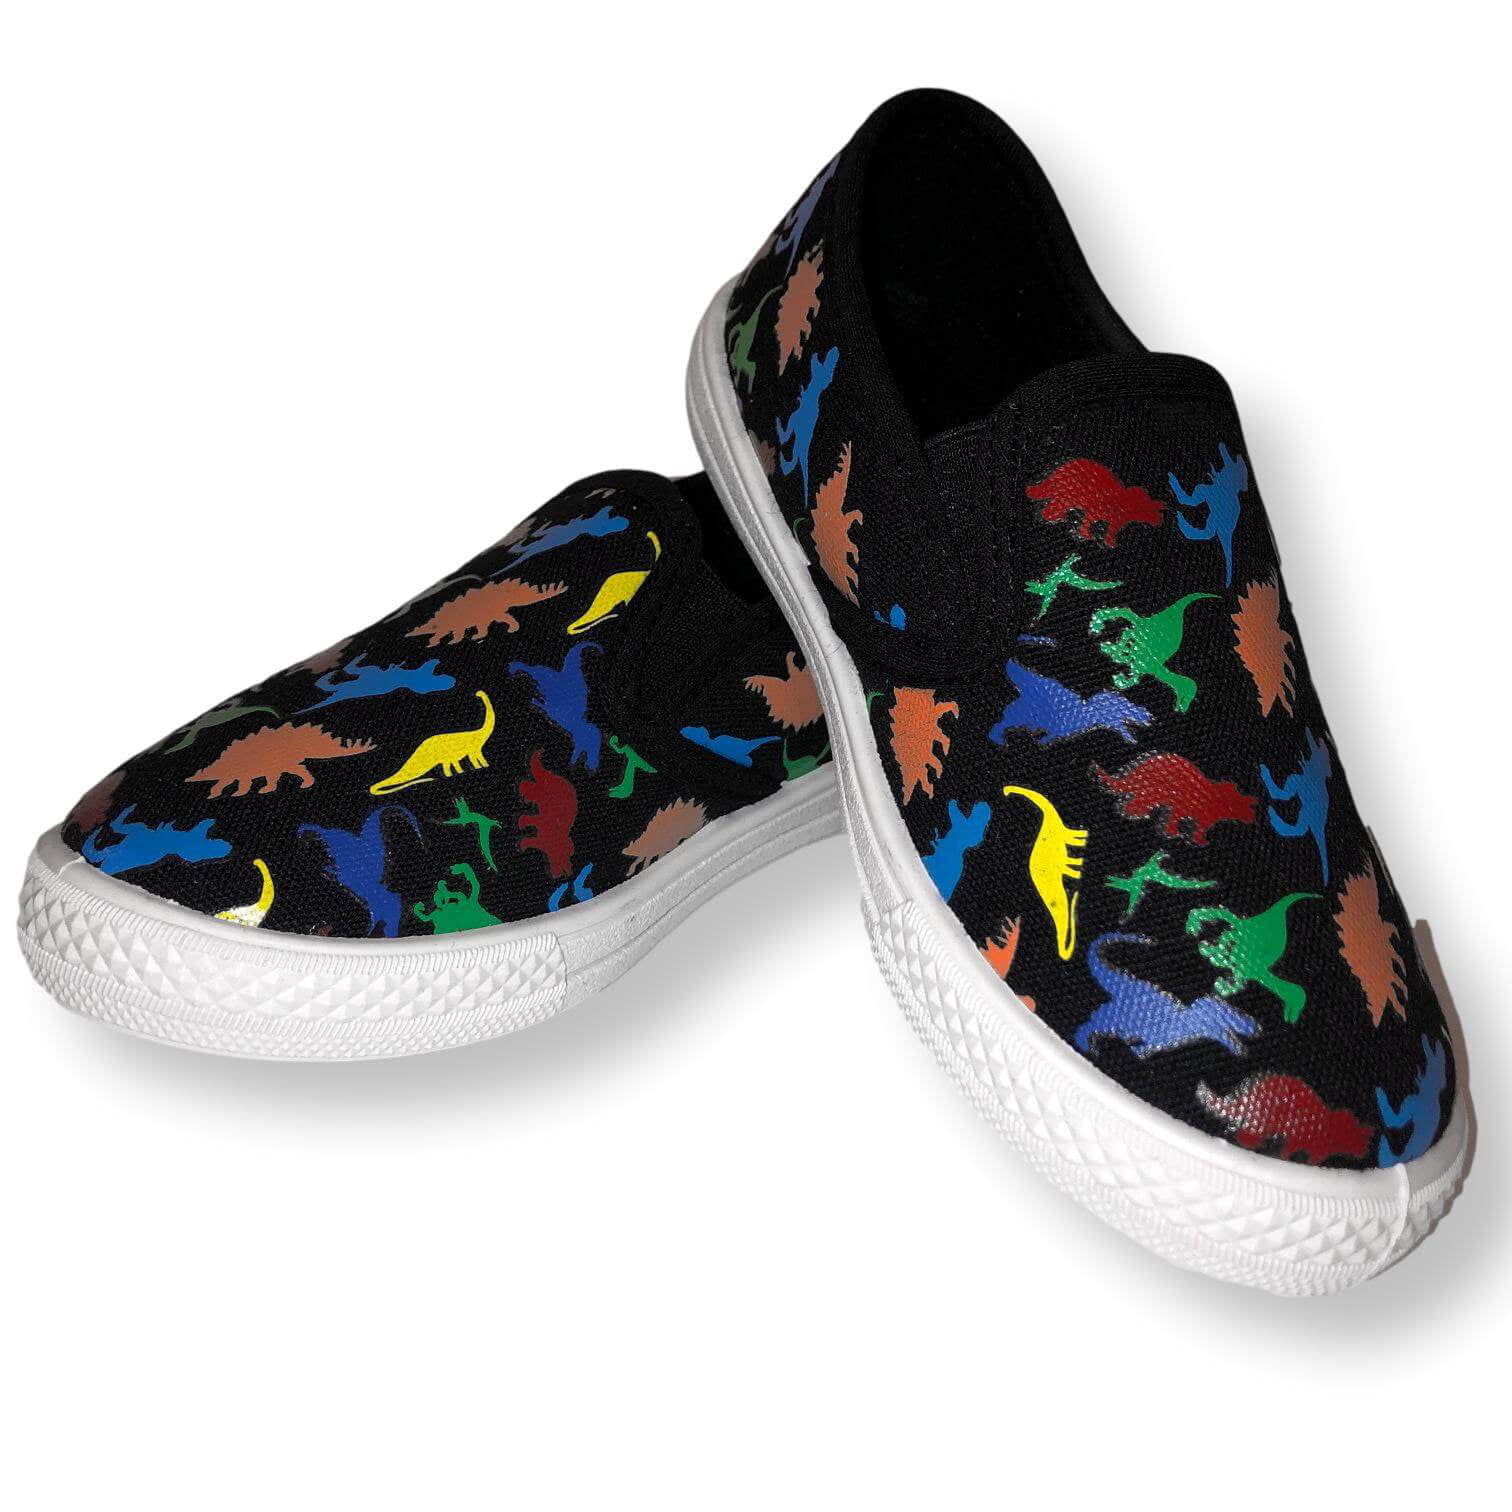 slip on sneakers for toddlers